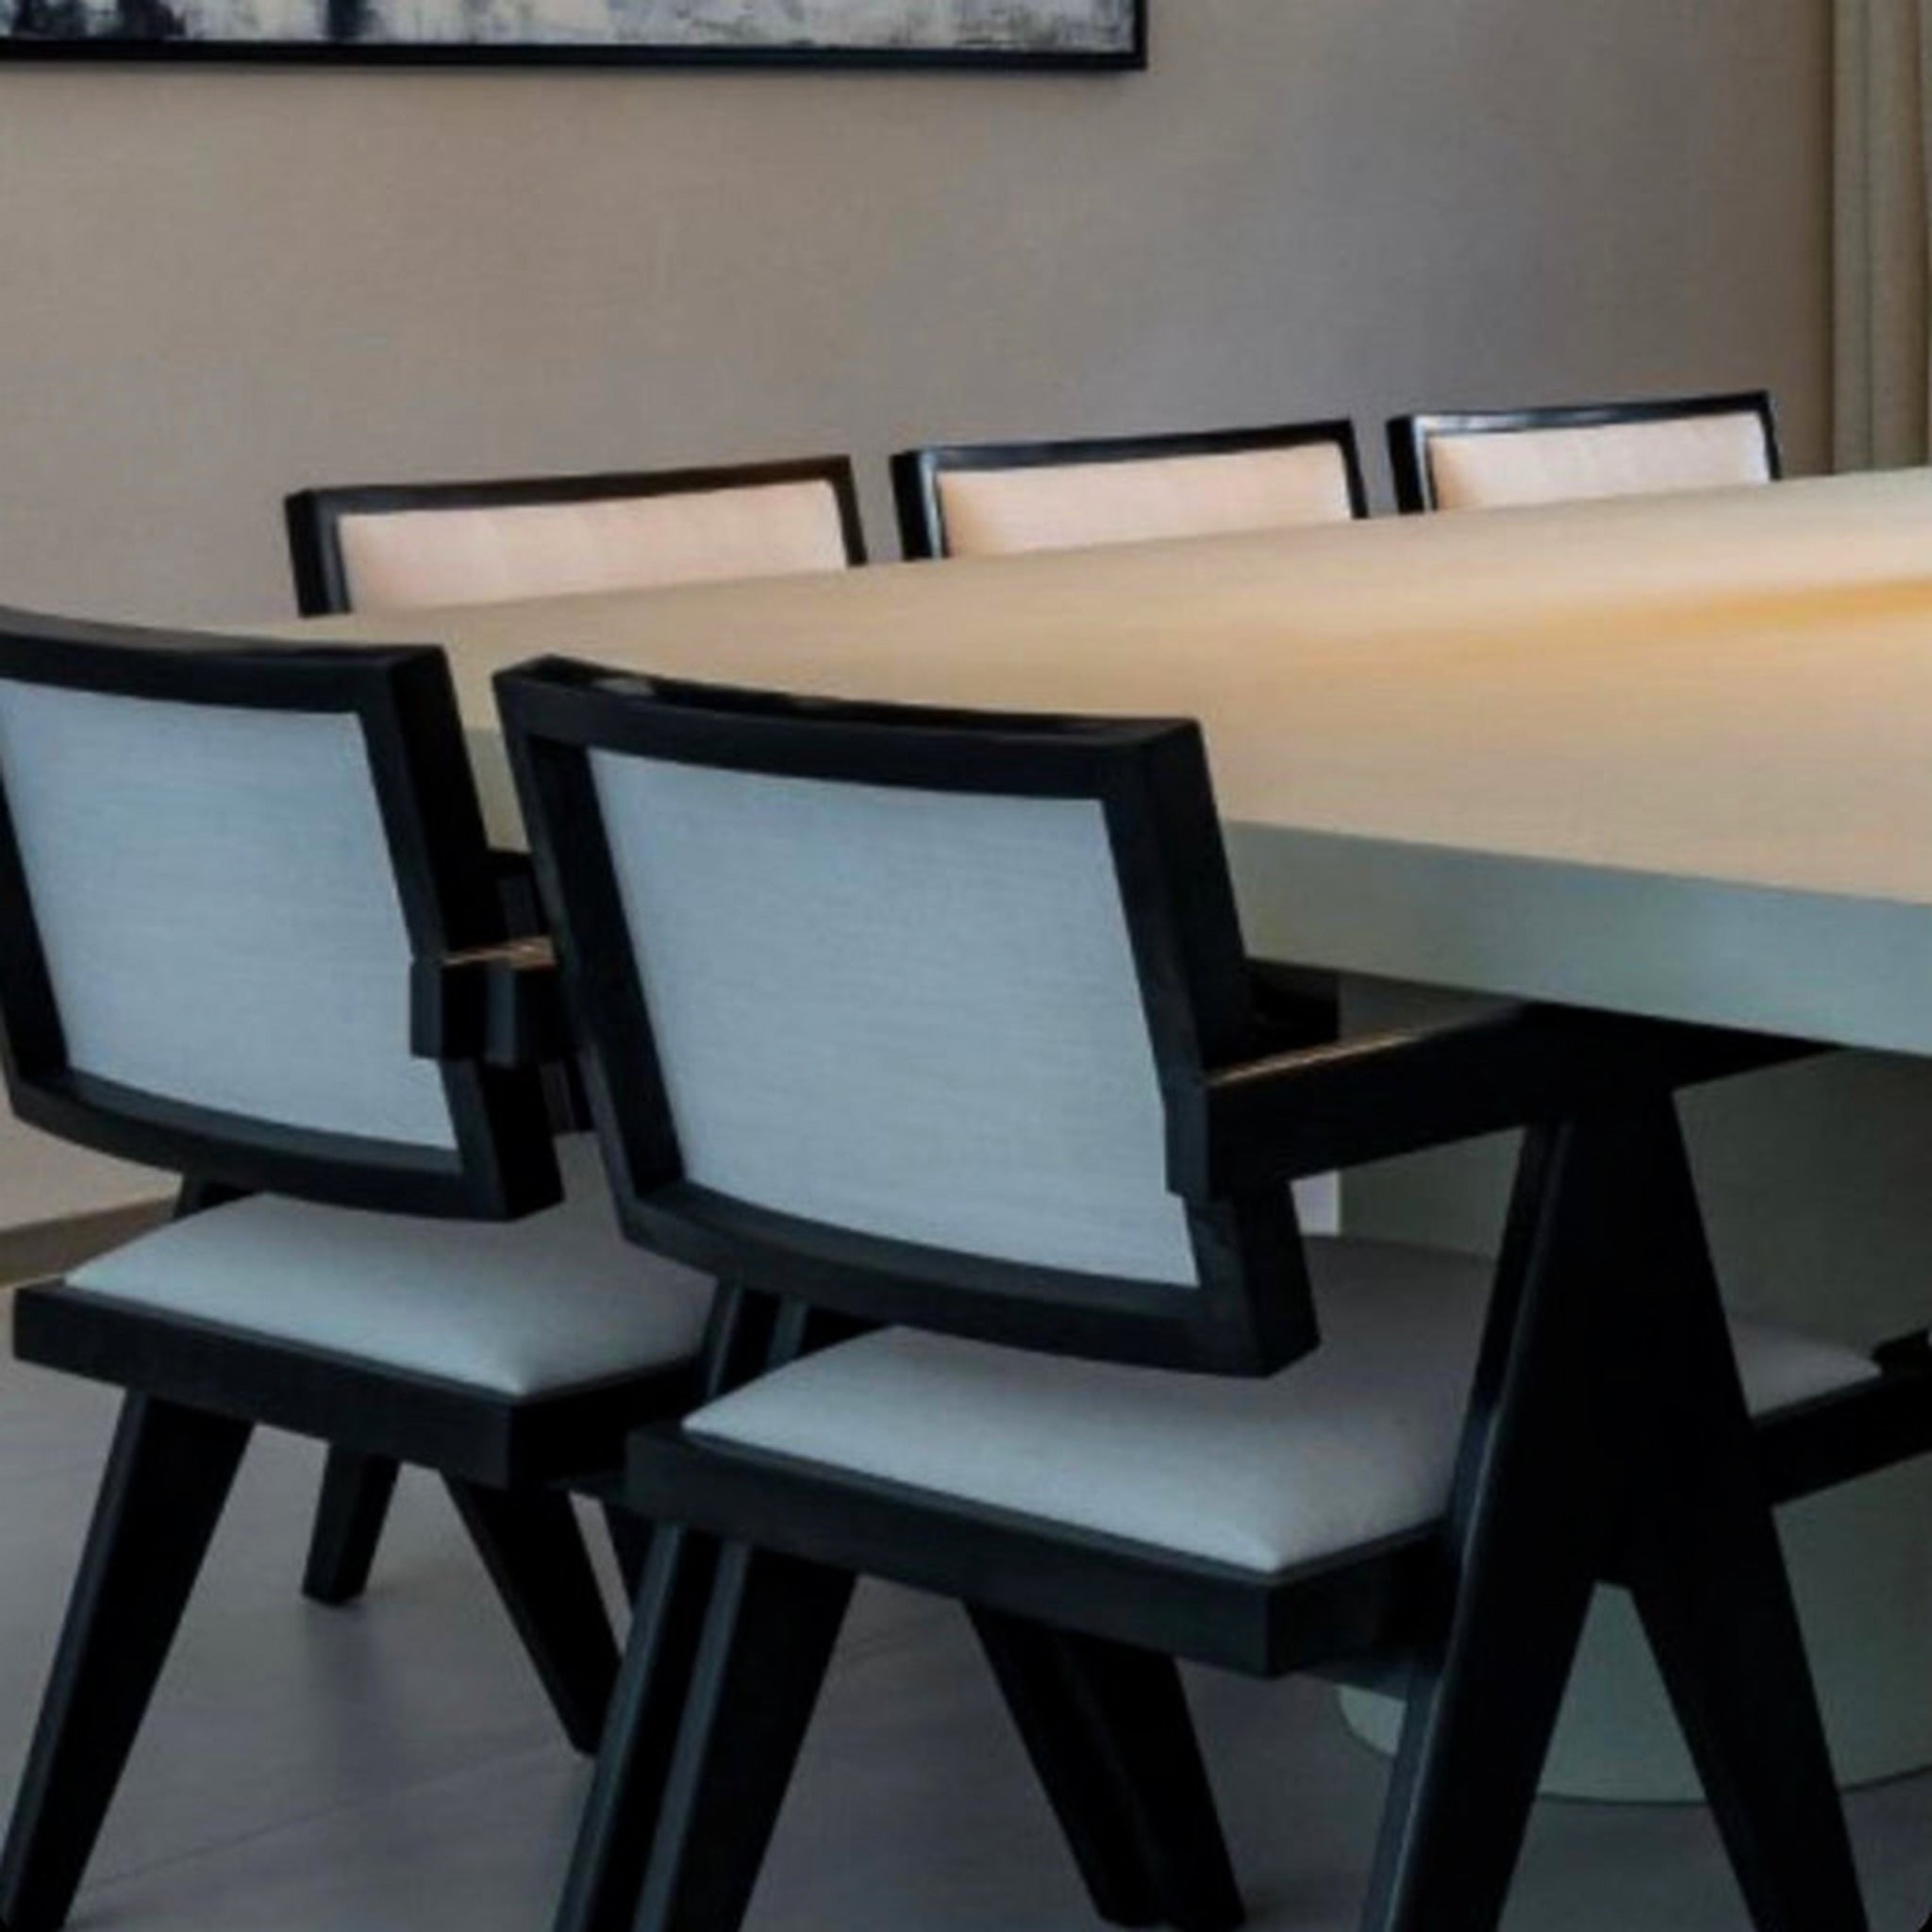 "The Pierre Dining Chair featuring sleek wooden construction and light fabric cushions."